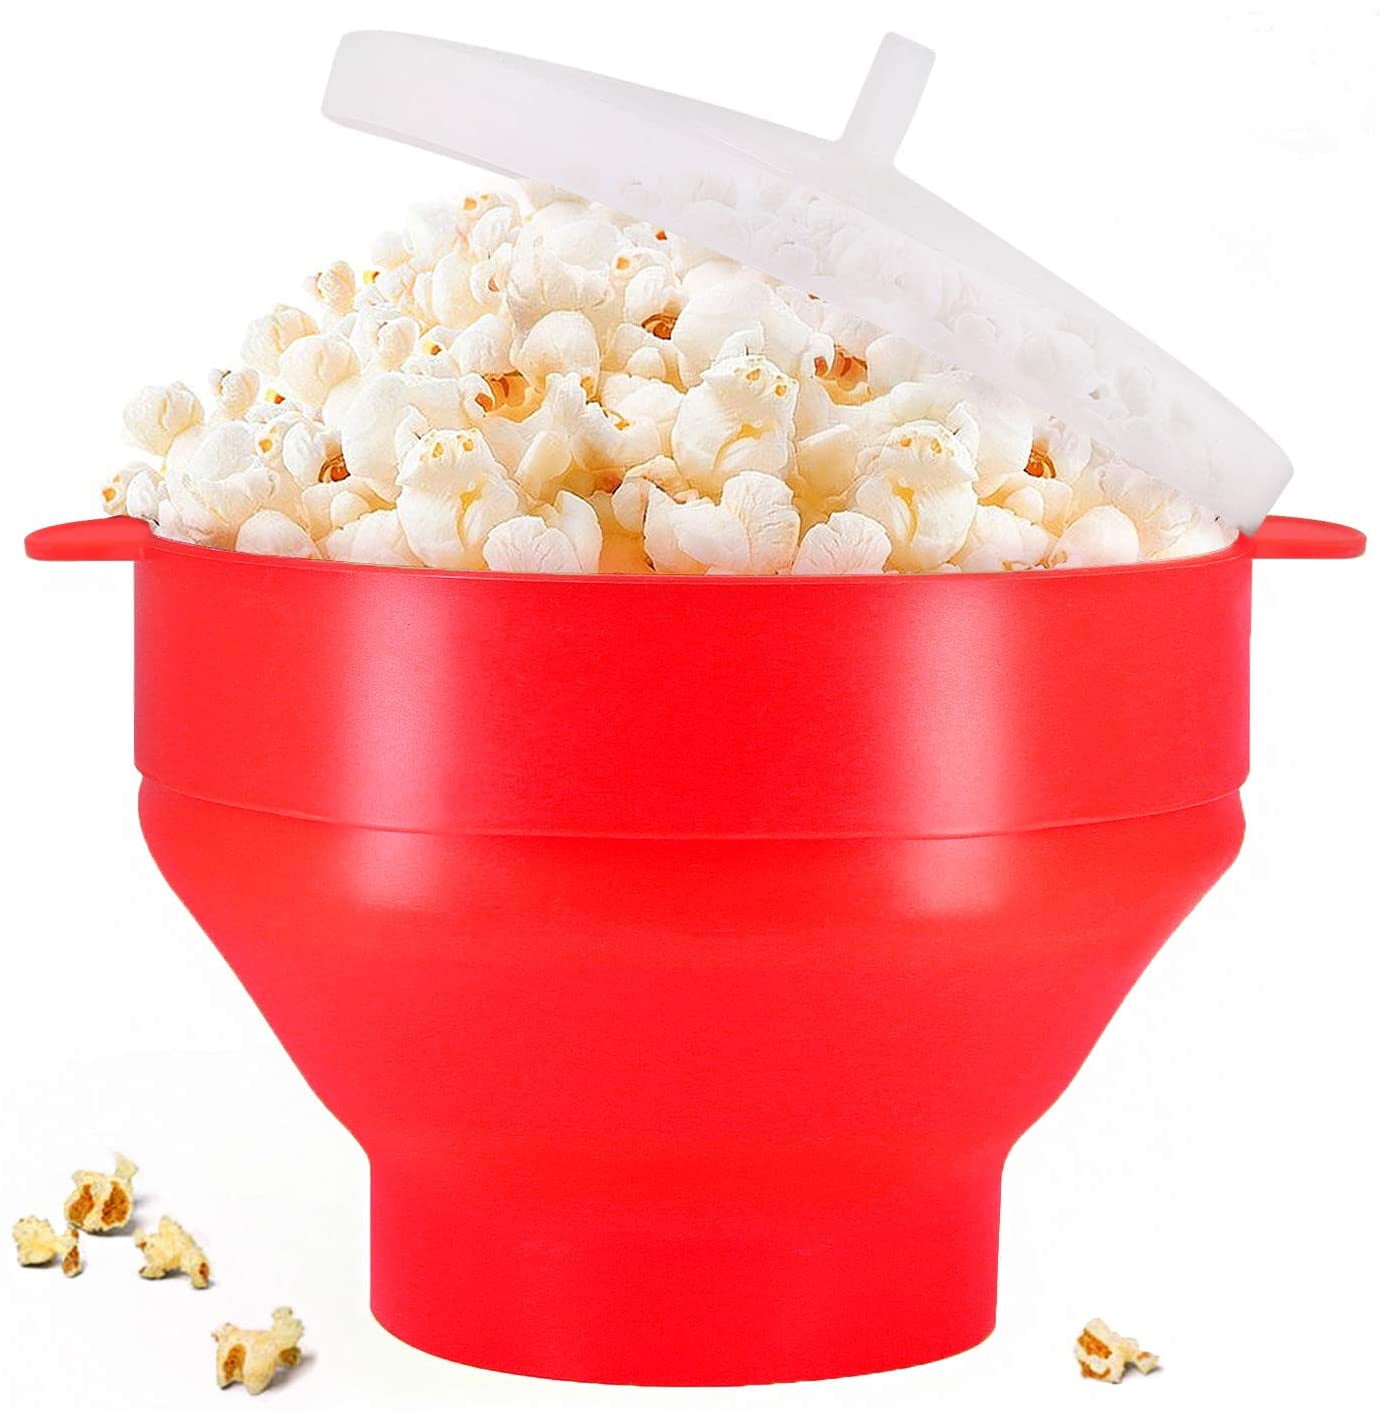 Silicone Microwave Popcorn Popper,for Home Microwave Popcorn Makers